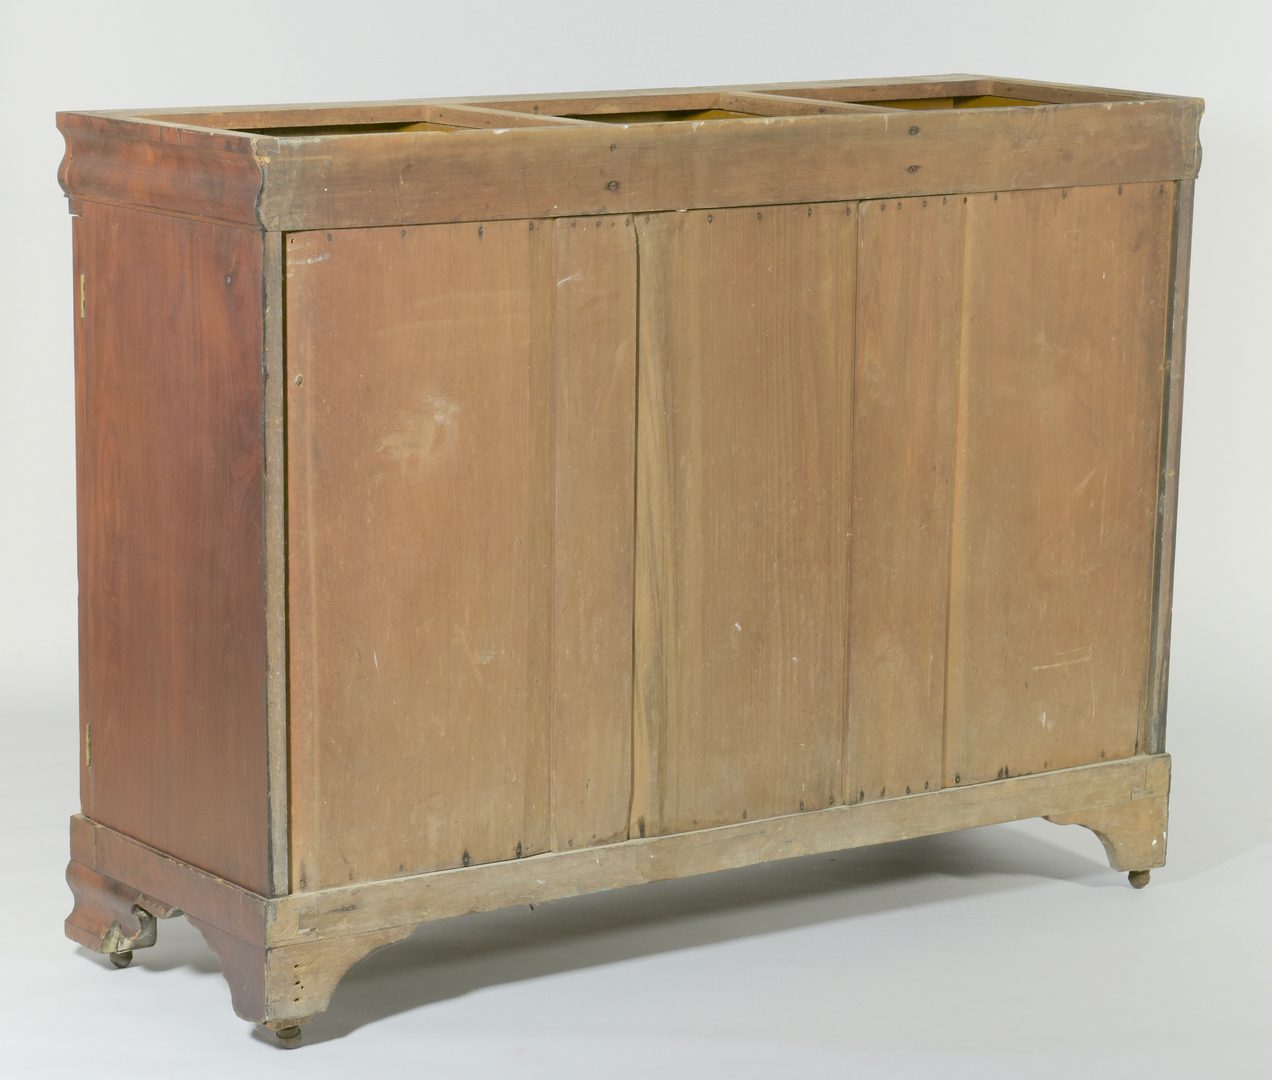 Lot 121: TN Gothic Revival Sideboard, Exhibited and Illustrated